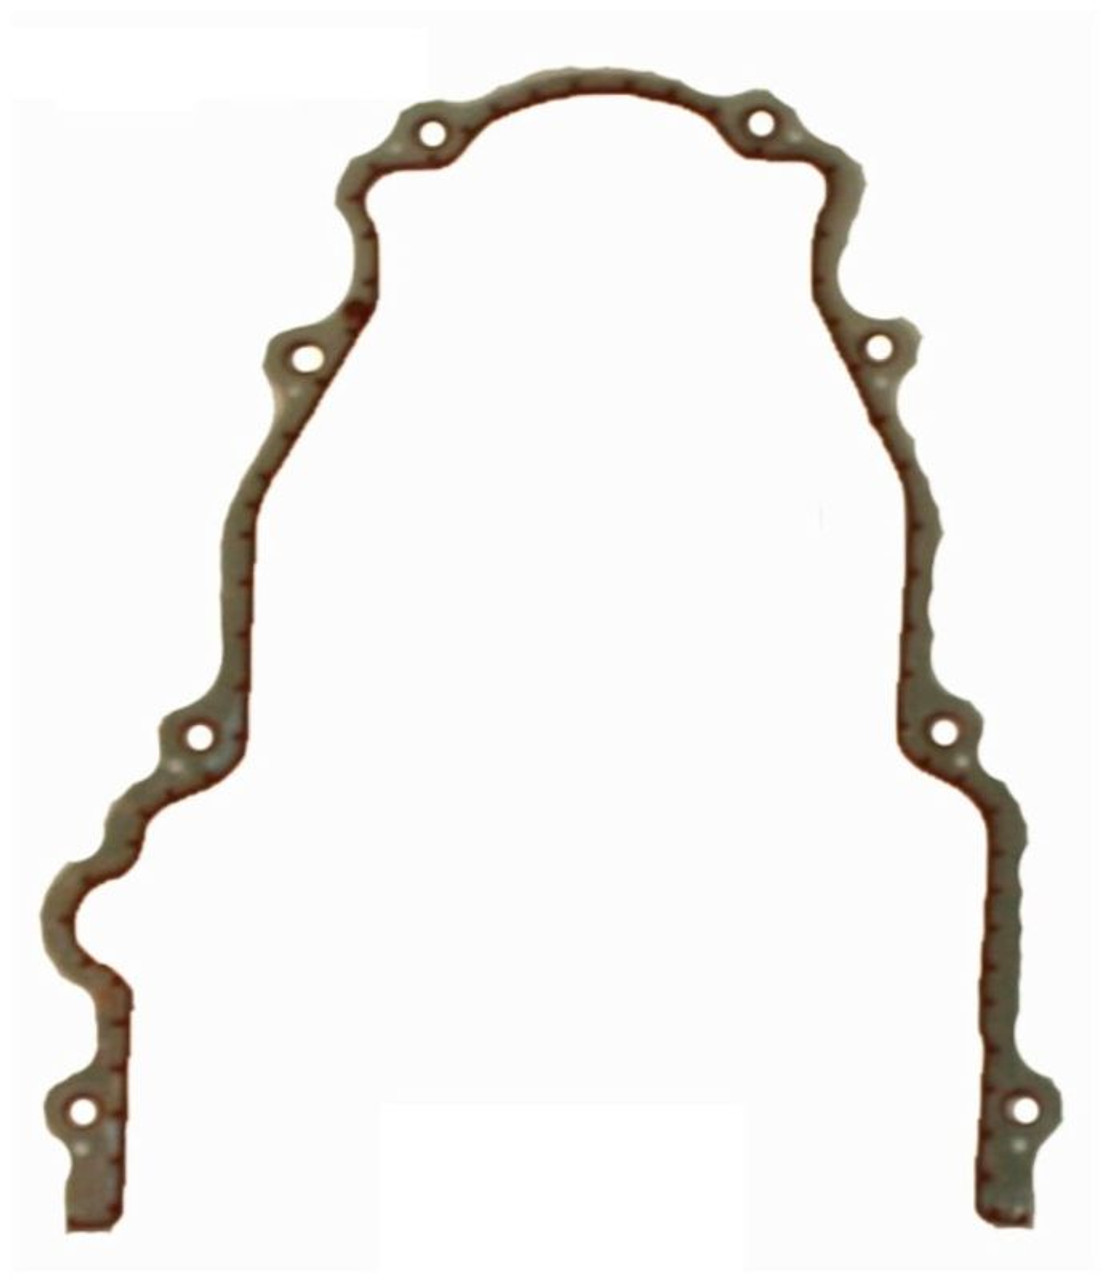 2007 Chevrolet Suburban 1500 6.0L Engine Timing Cover Gasket TCG293-A -419